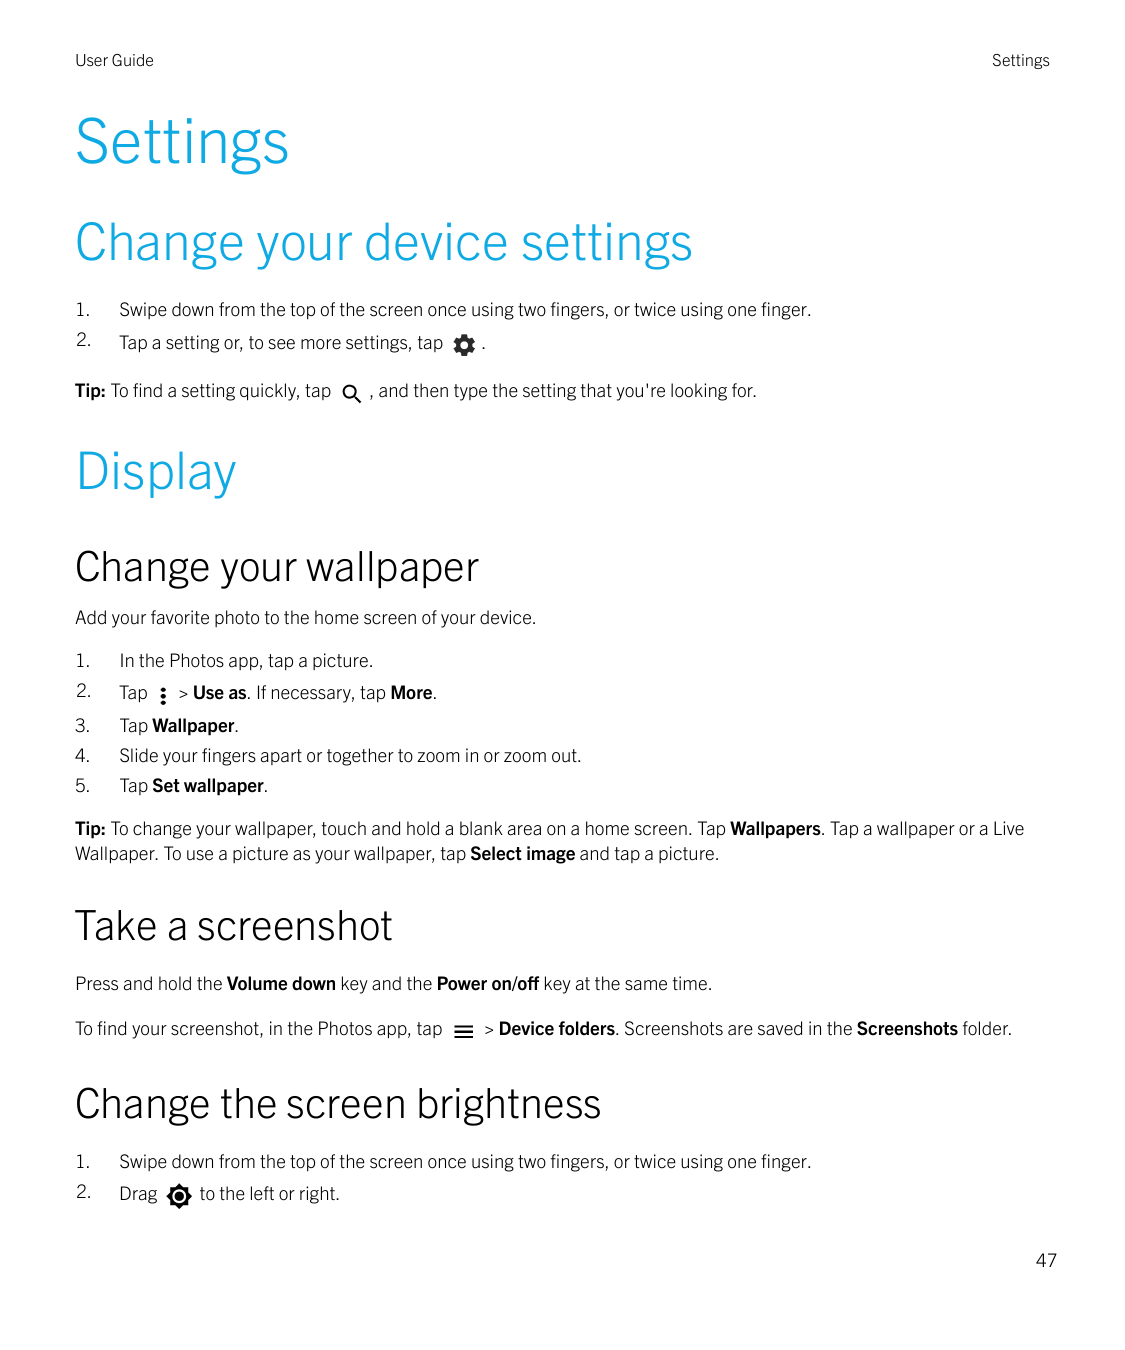 User GuideSettingsSettingsChange your device settings1.Swipe down from the top of the screen once using two fingers, or twice us